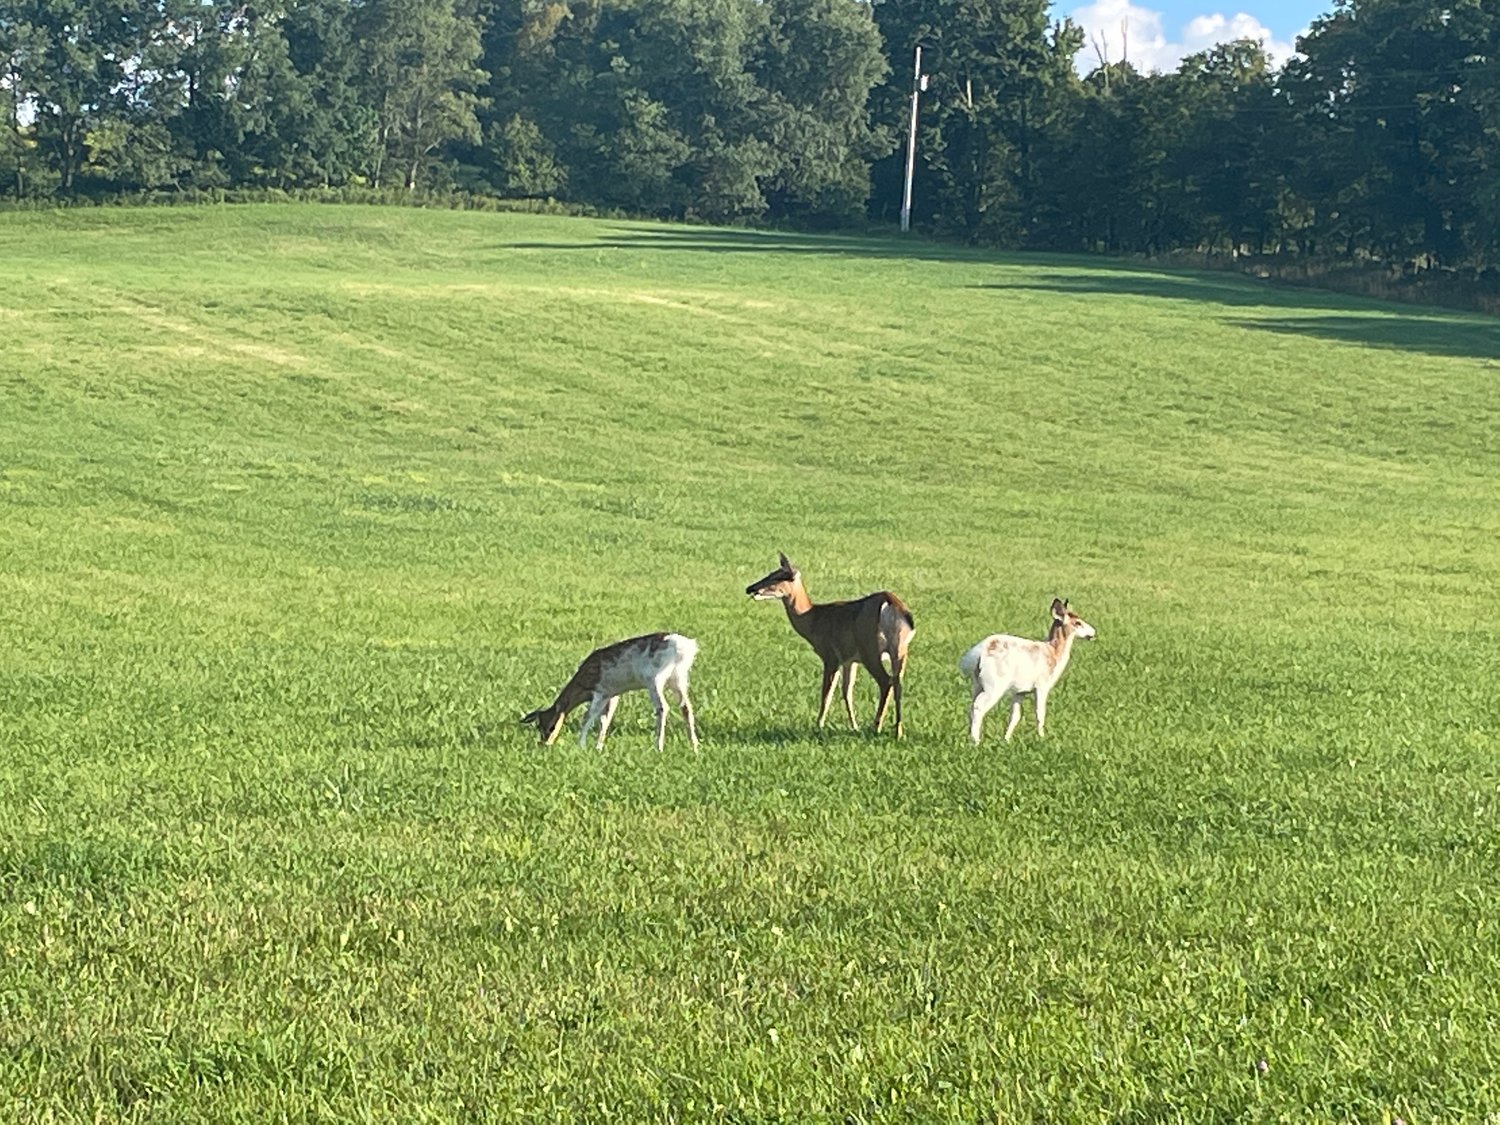 Joan Stone, Walton, was out driving on Delaware County back roads Thursday, Aug. 25, and spotted these young piebald white-tailed deer grazing on a hillside.